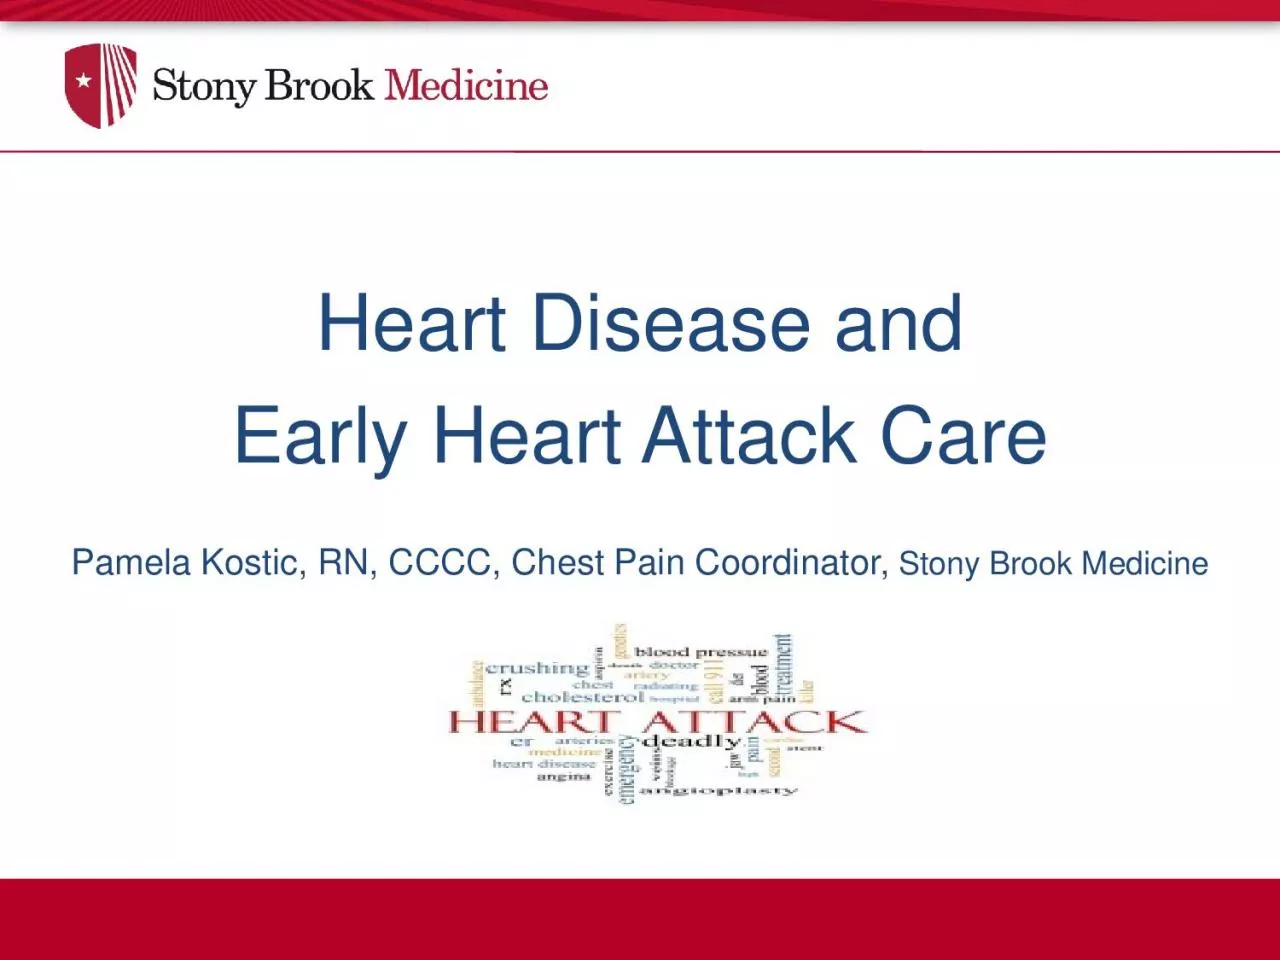 Heart Disease andEarly Heart Attack CarePamela Kostic RN CCCC Chest